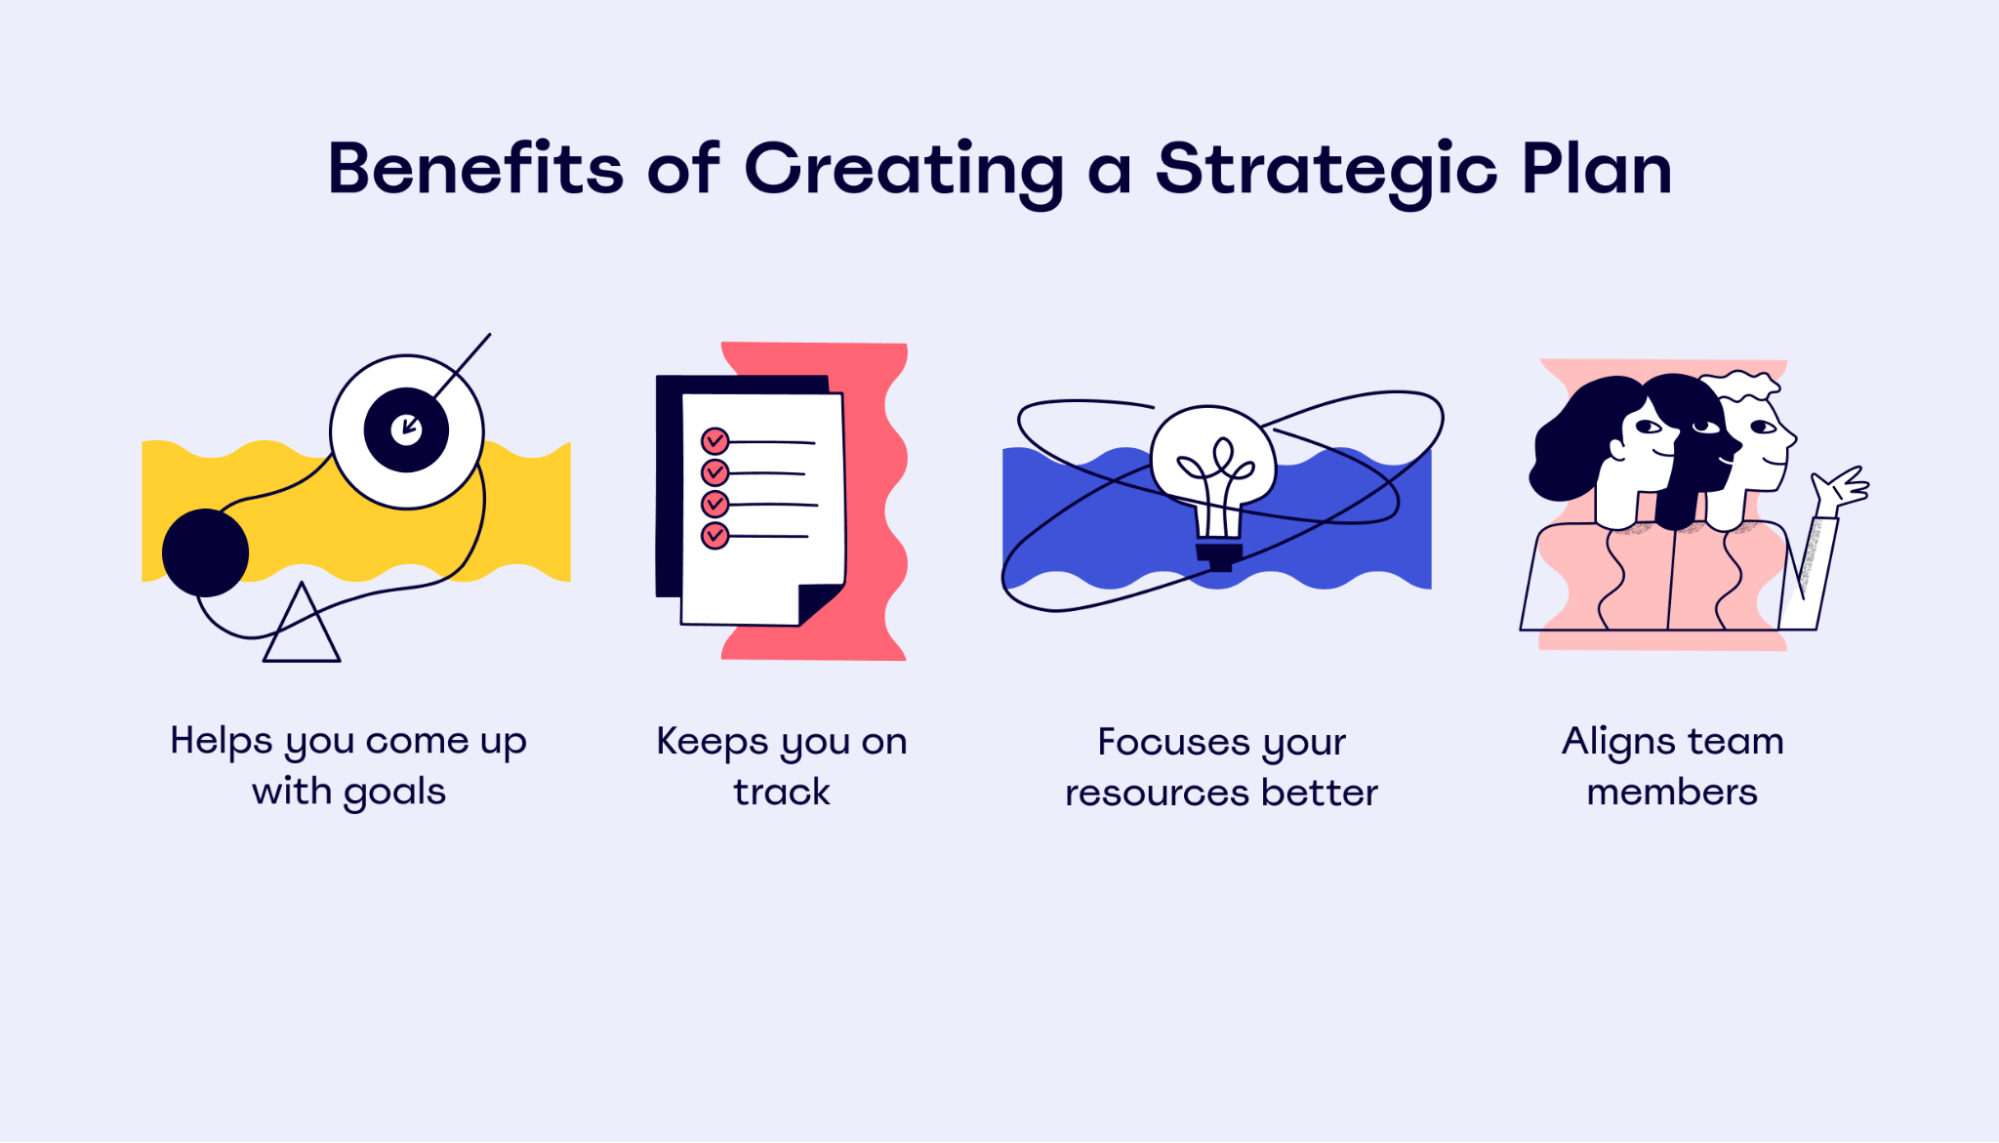 Why creating a strategic plan is important